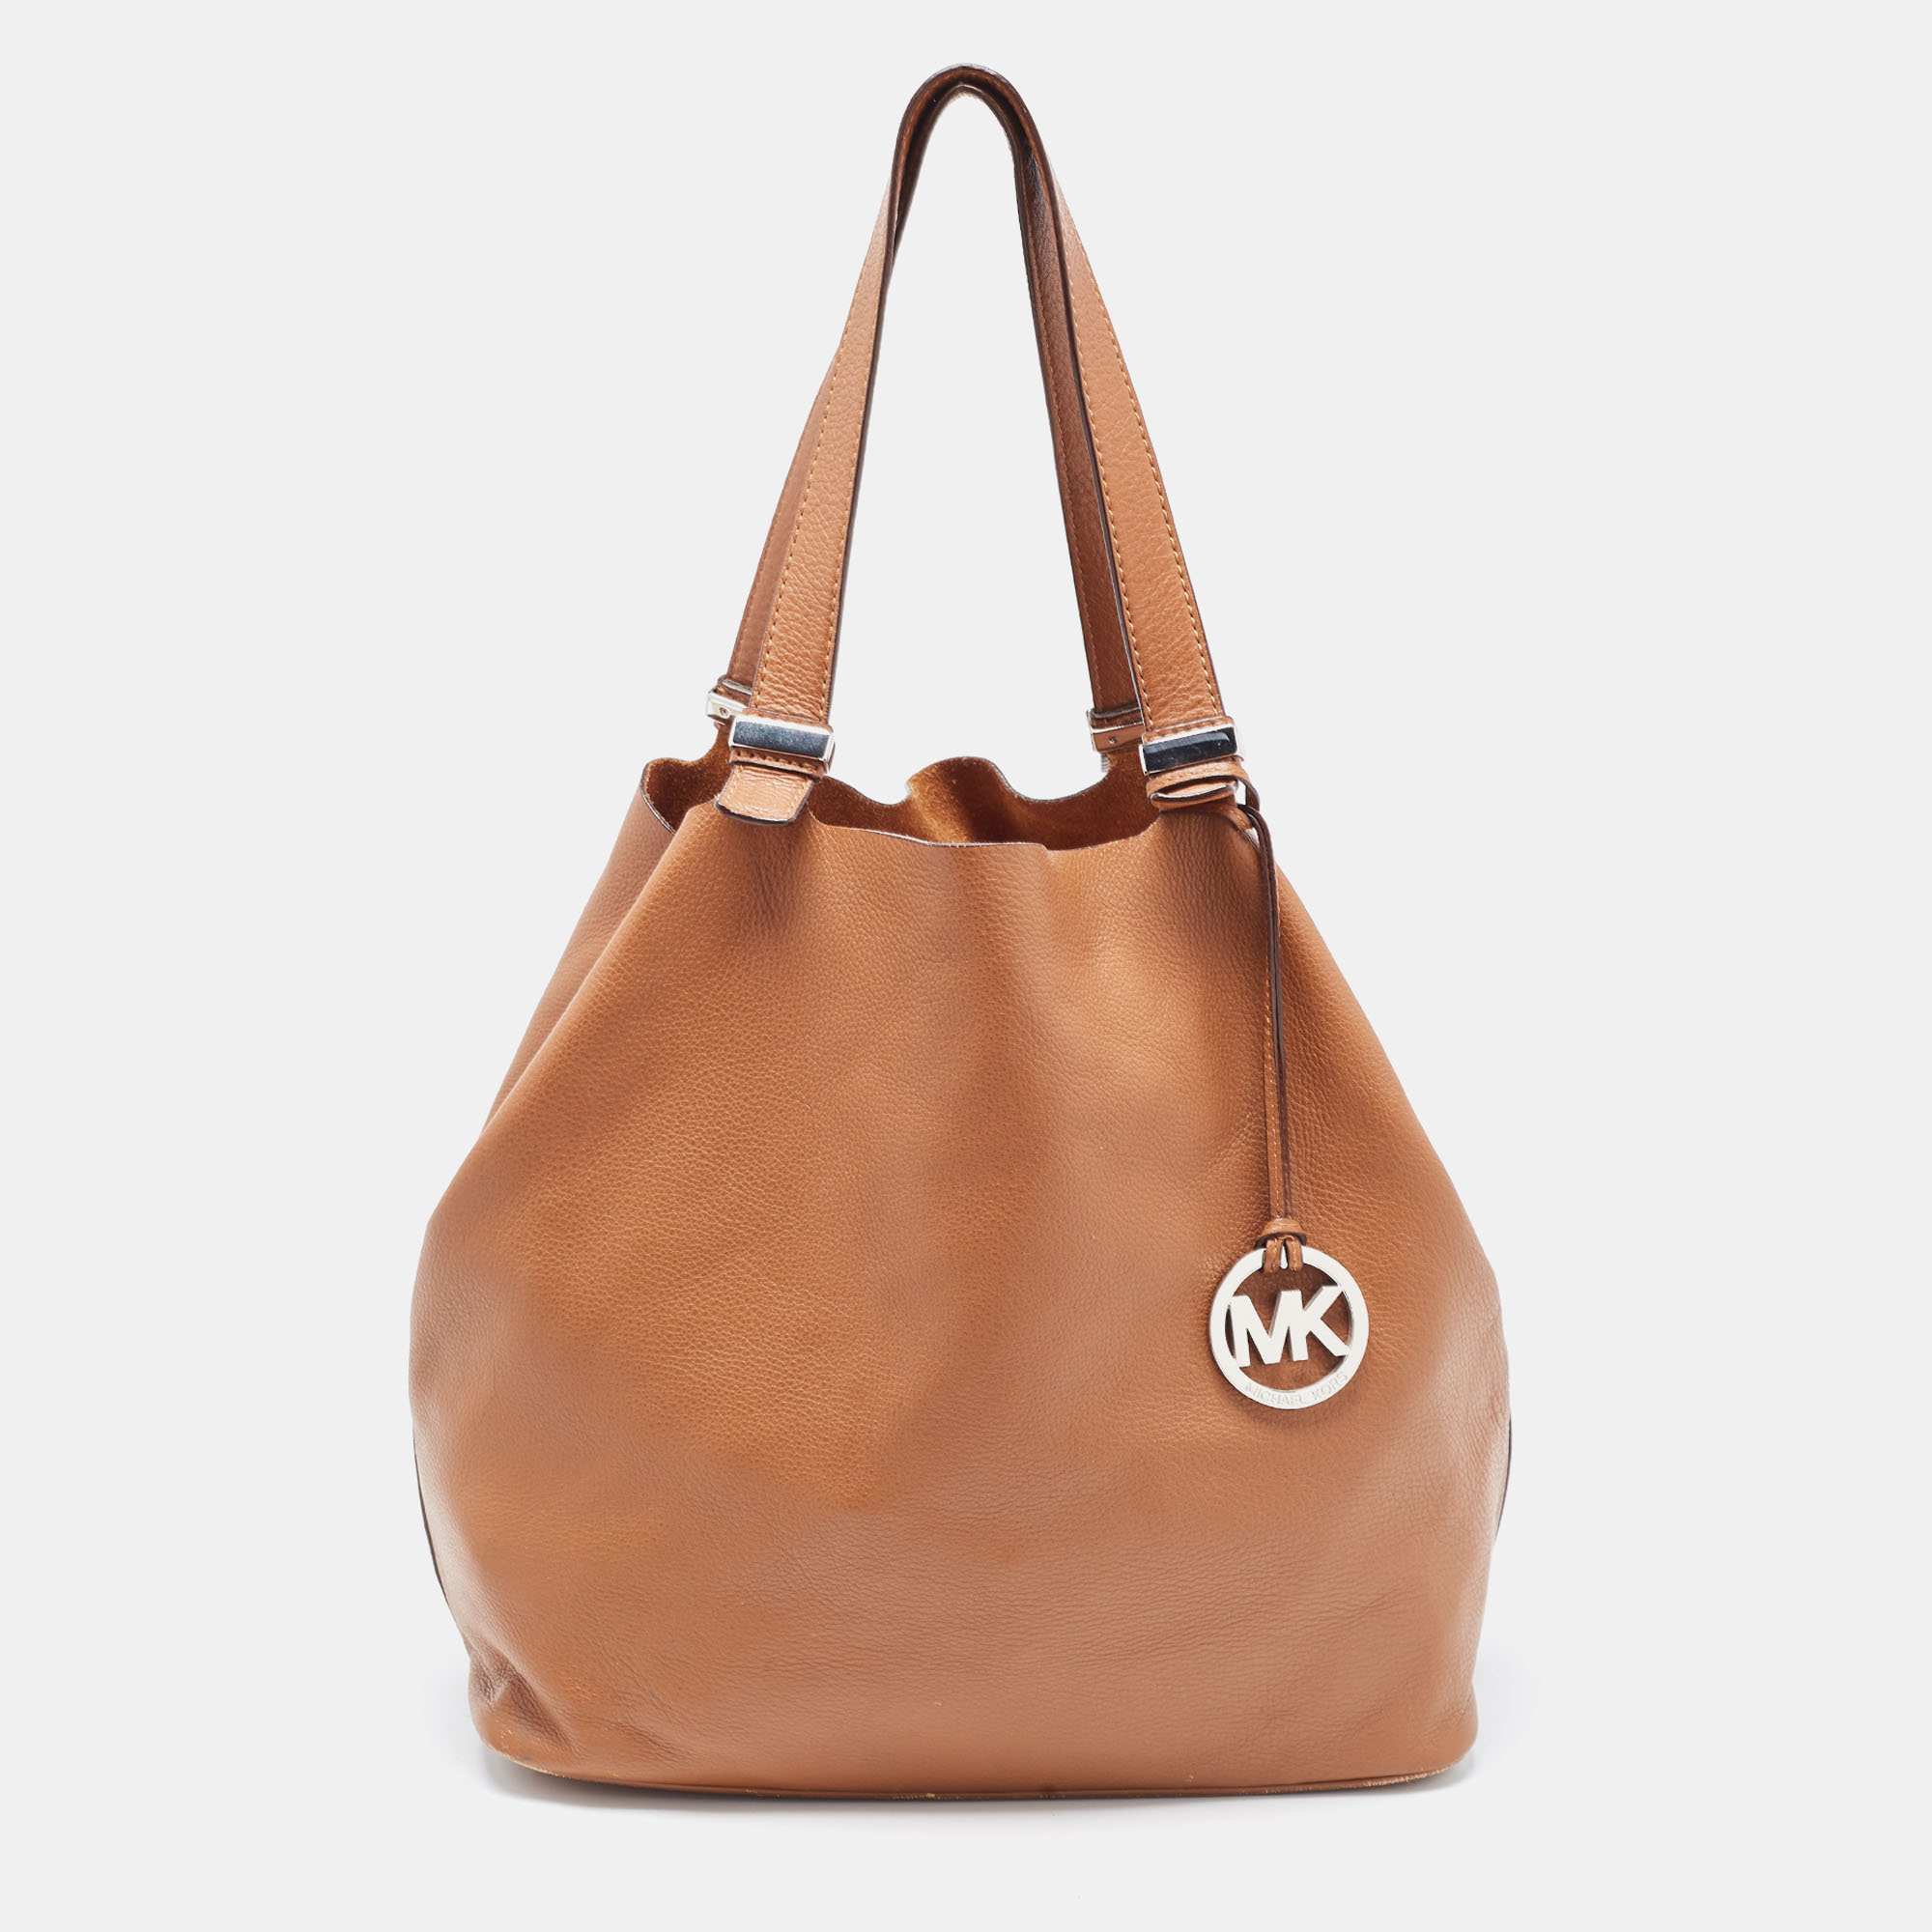 Pre-owned Michael Kors Brown Leather Bucket Tote